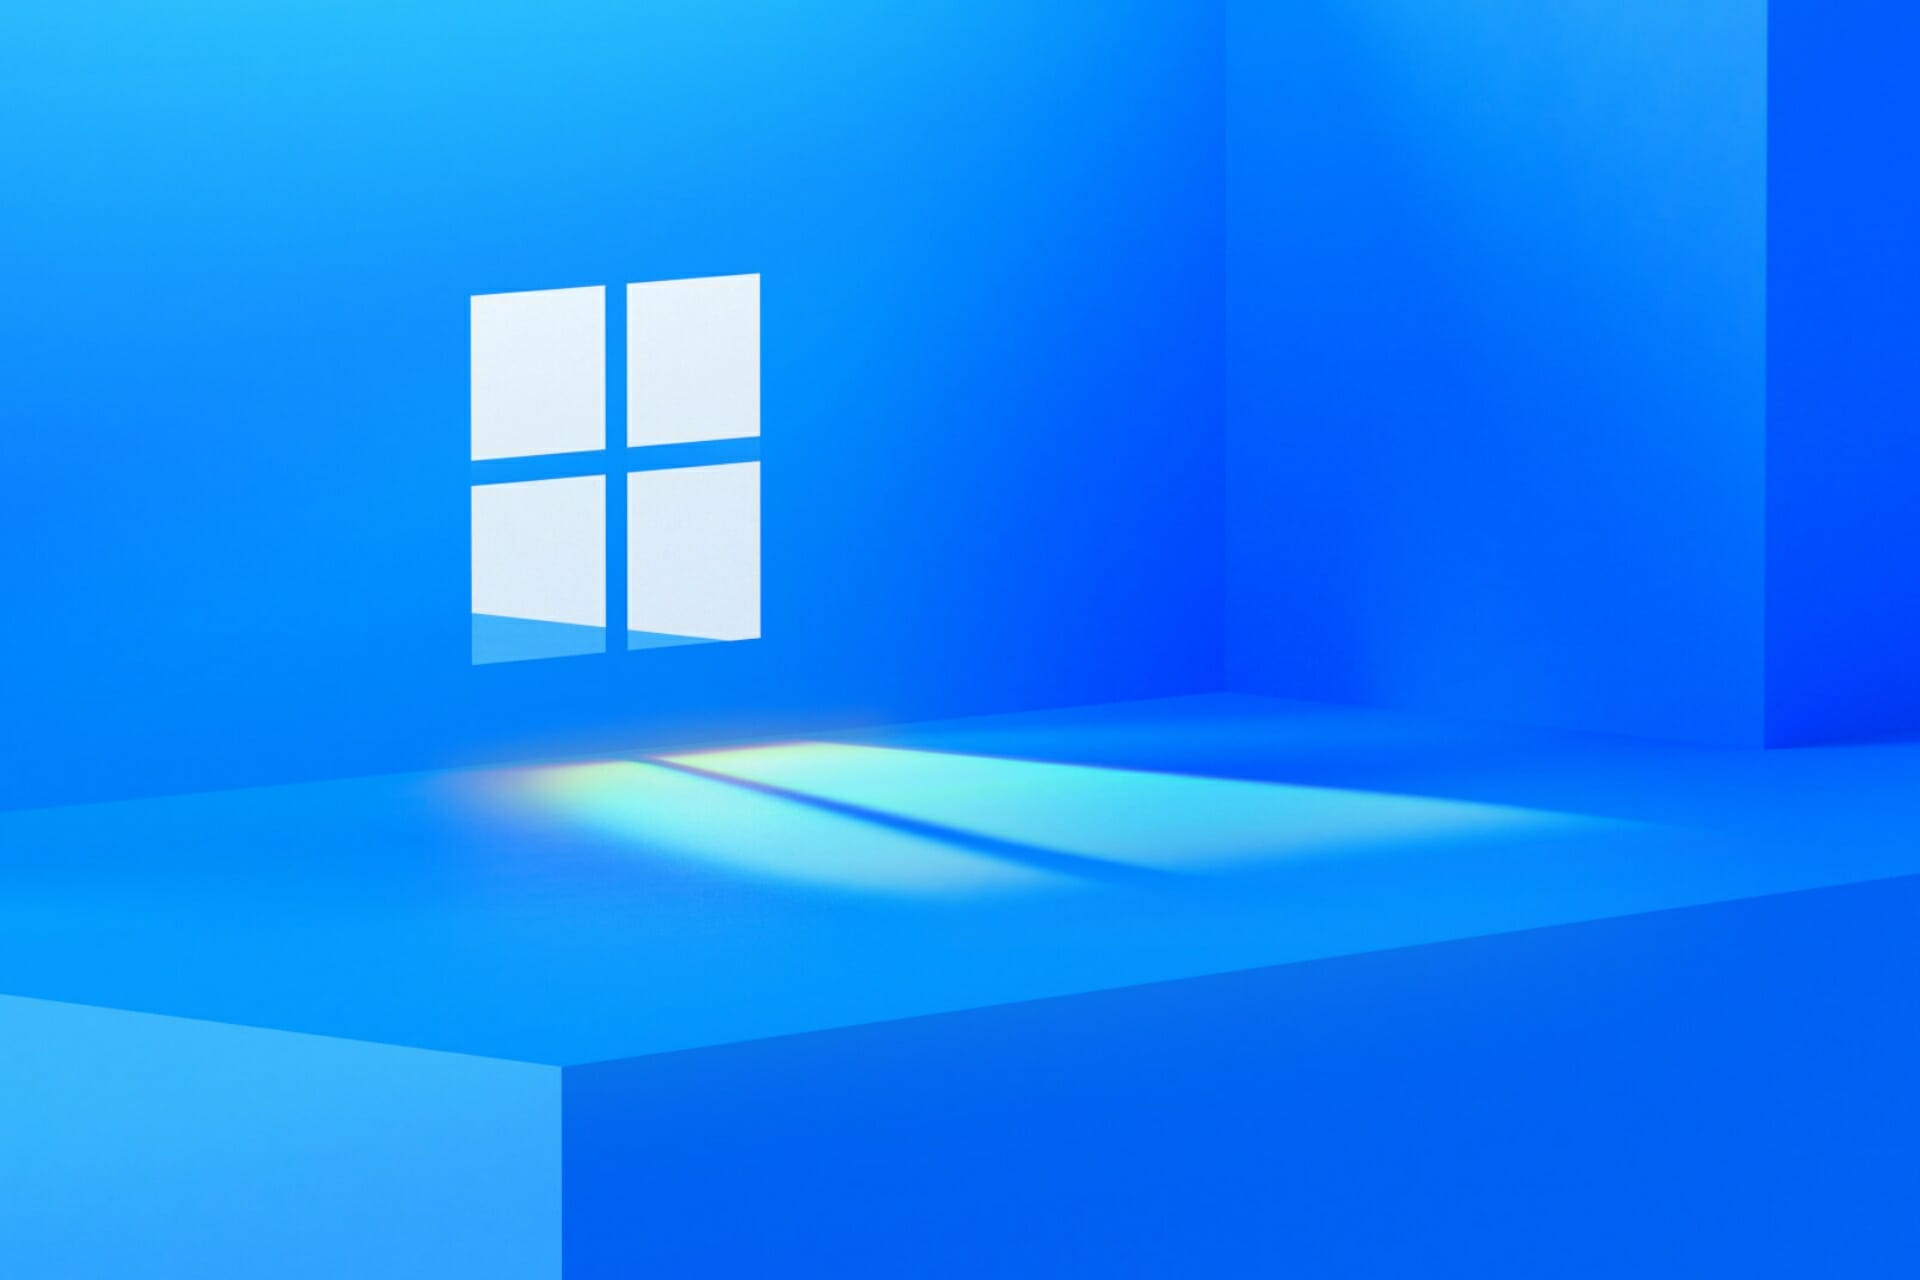 How to download the latest Windows 11 wallpaper